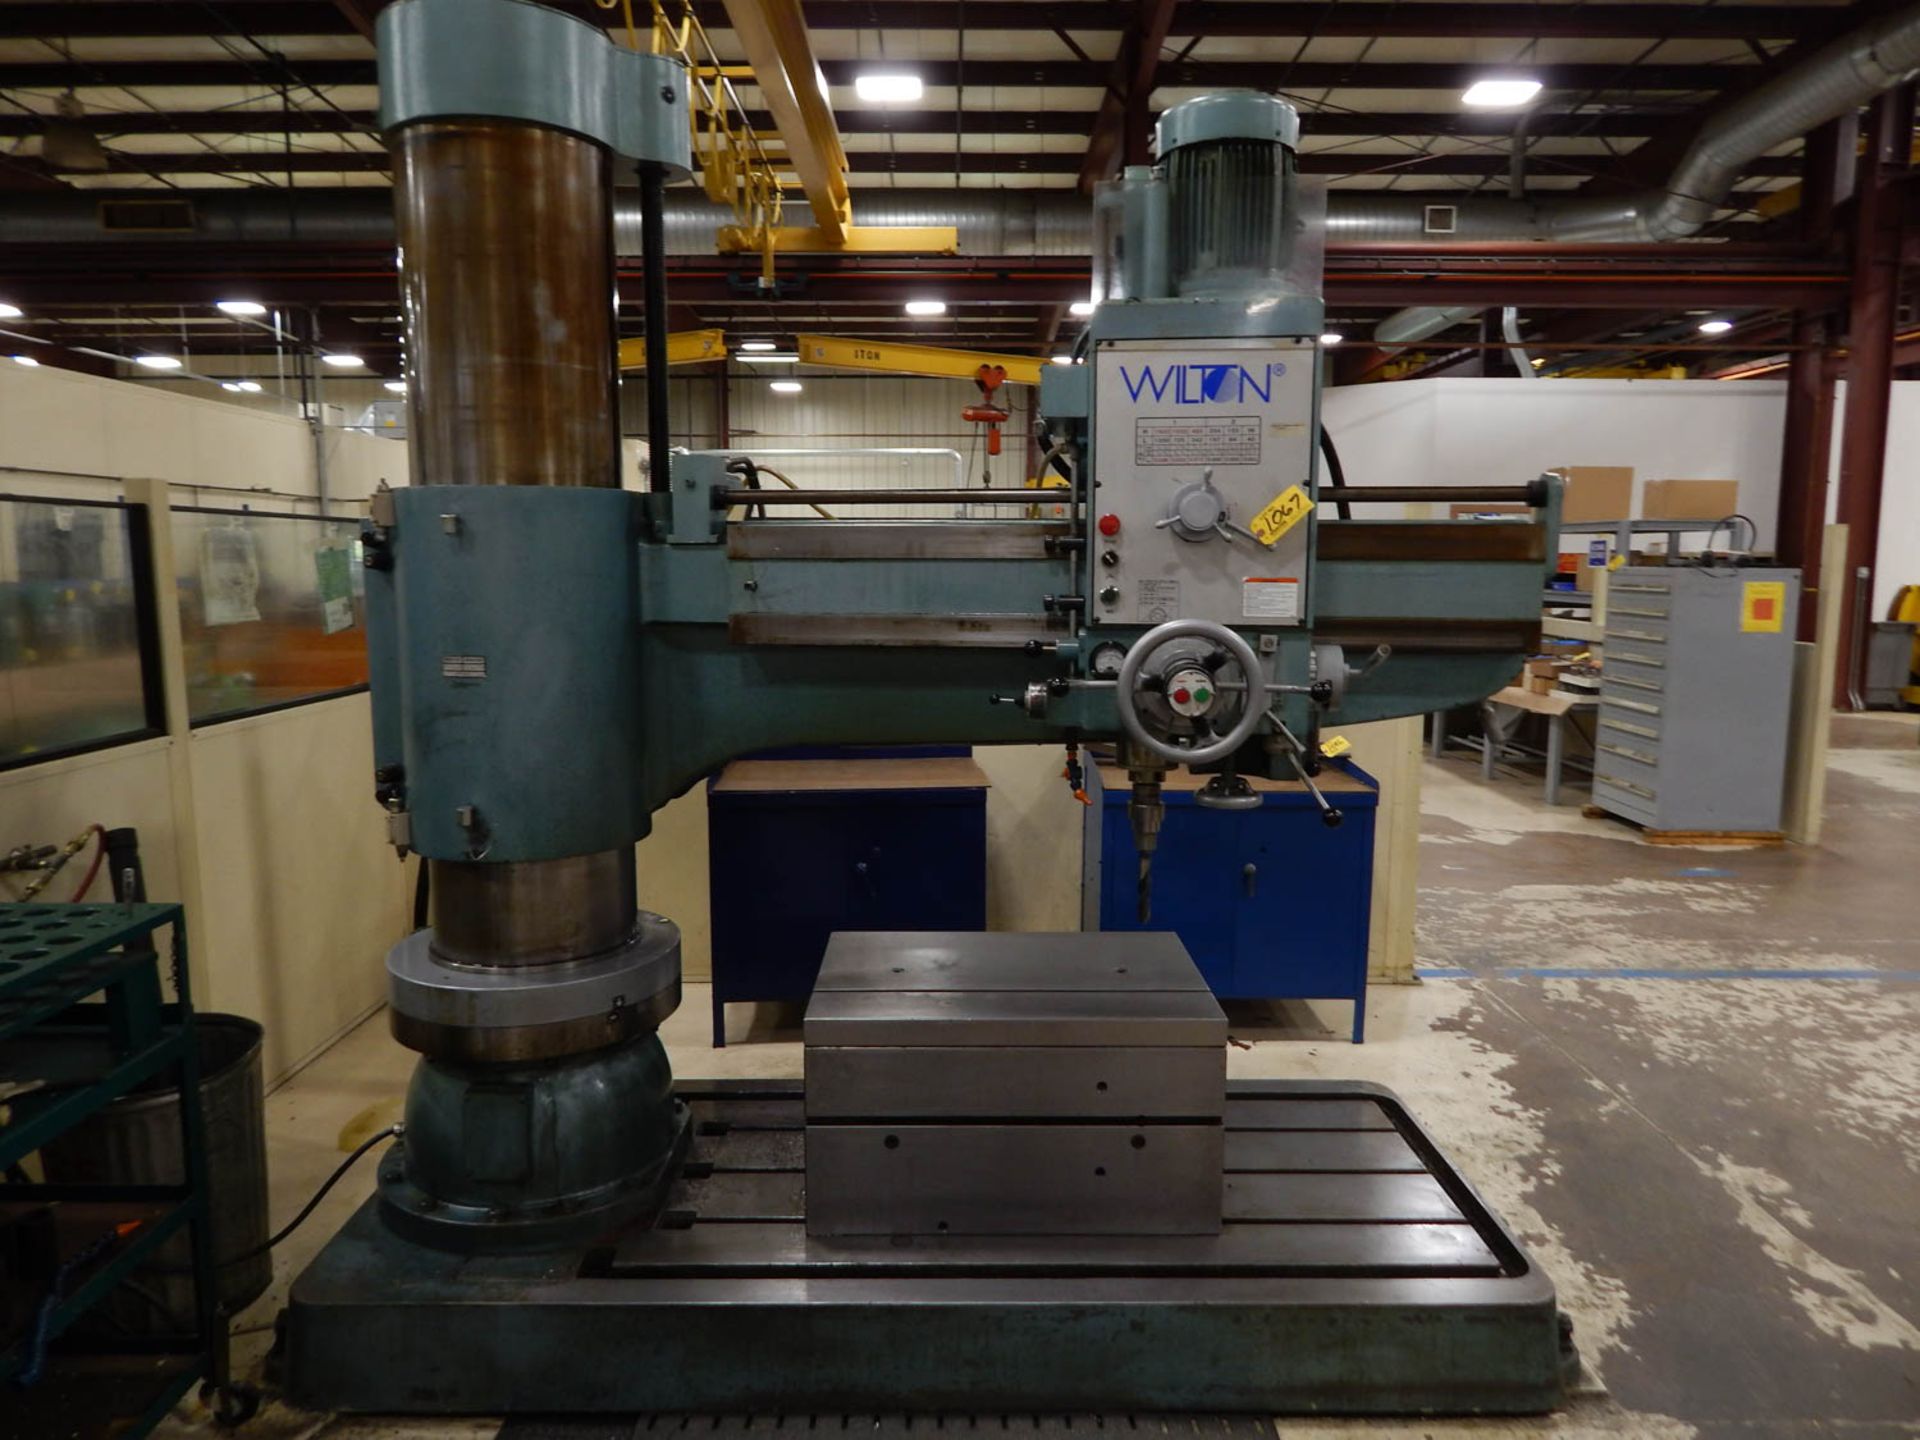 WILTON MDL. 5216001 4' X 17'' RADIAL DRILL, WITH 40-1920 RPM SPINDLE SPEEDS, POWER ELEVATION,